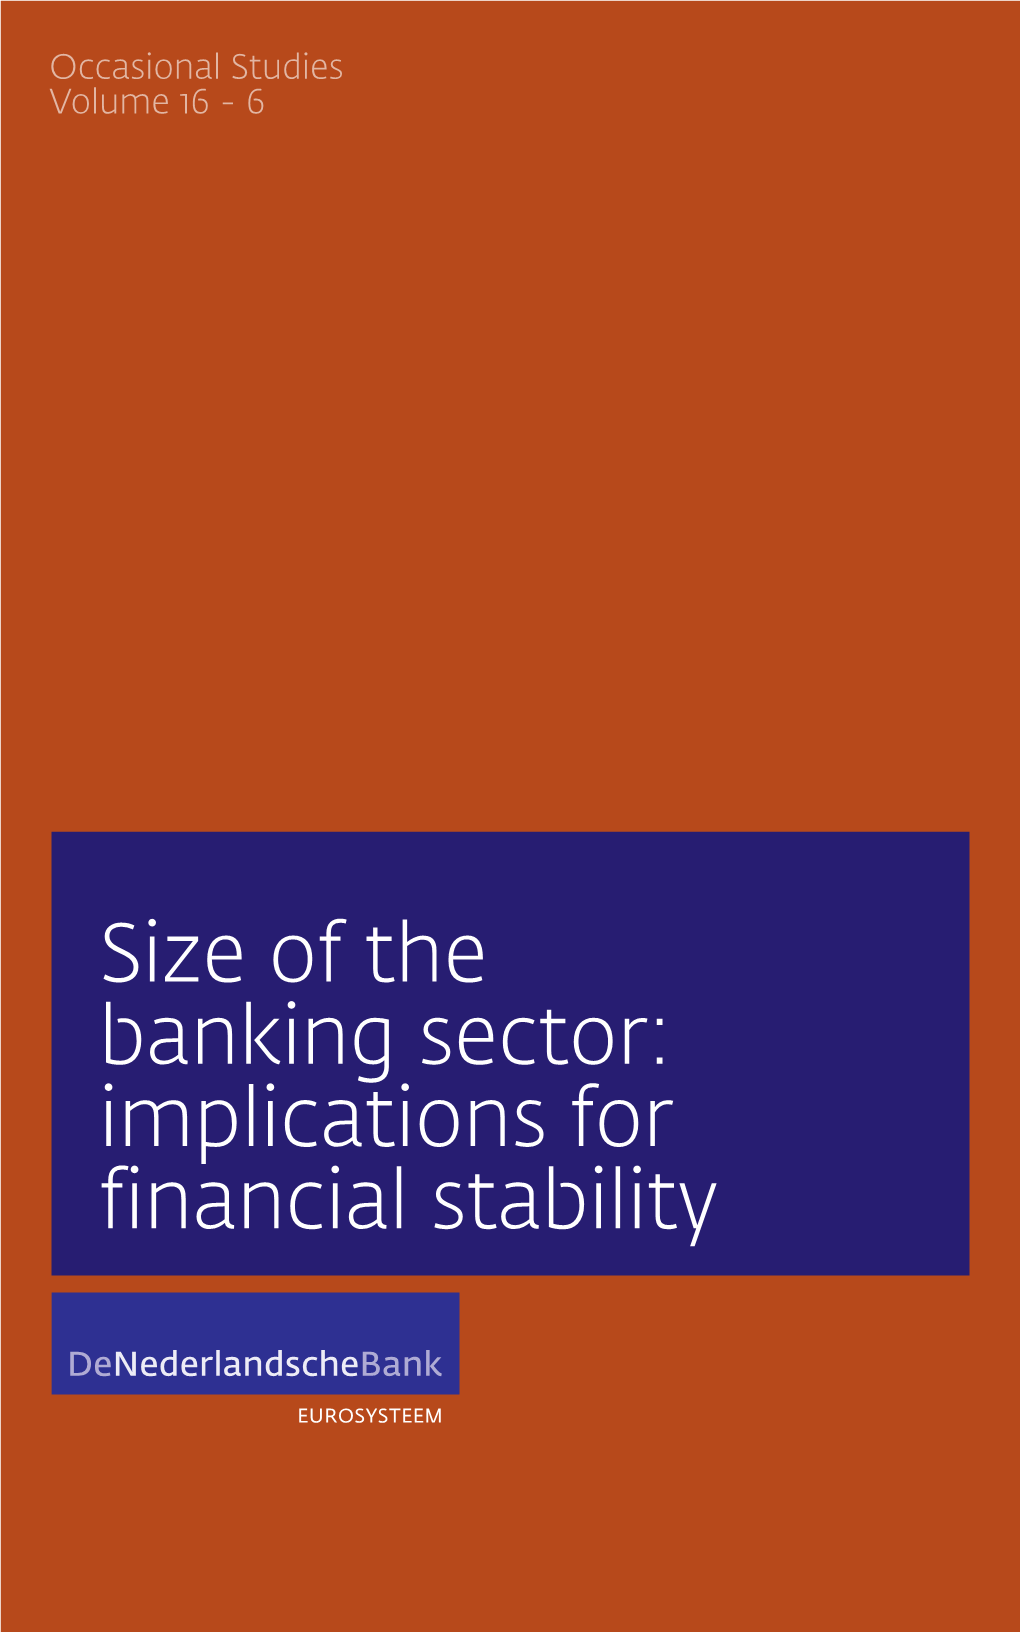 Size of the Banking Sector: Implications for Financial Stability